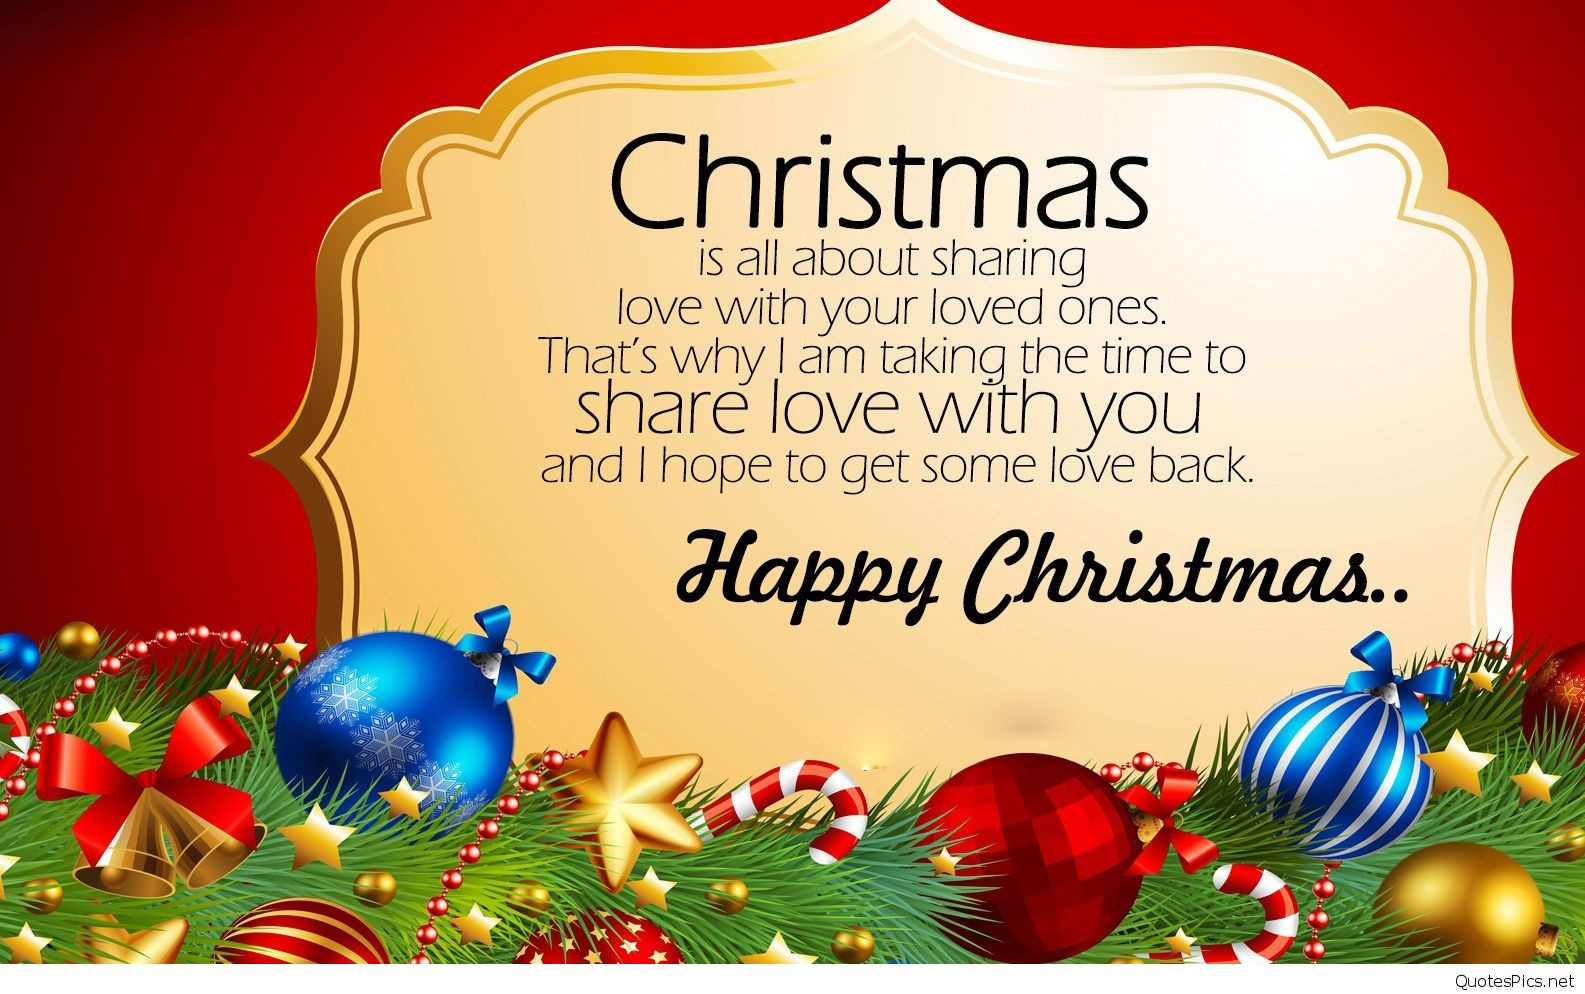 Happy Christmas Quotes
 Best Happy Christmas wallpapers quotes sayings and hd images